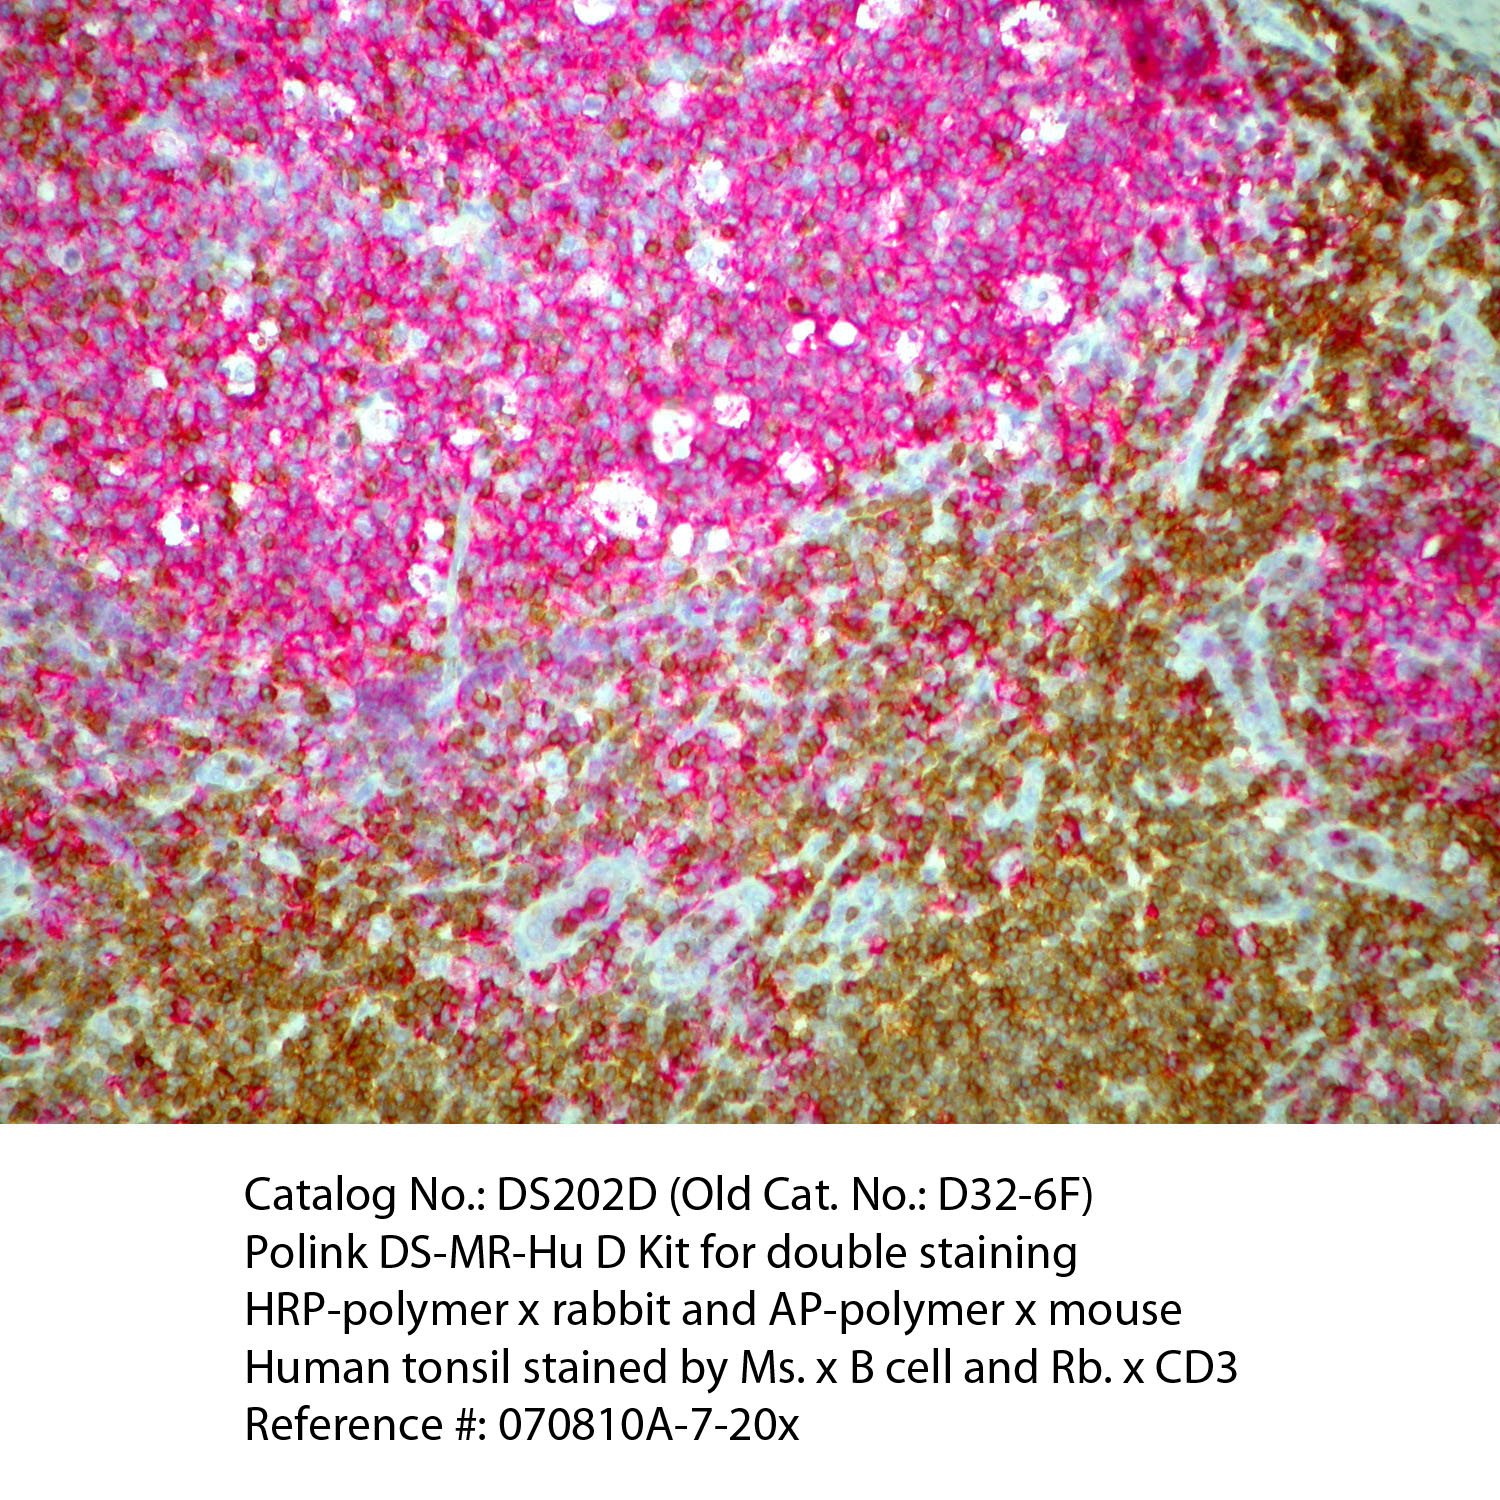 IHC staining of FFPE human tonsil tissue within normal limits using mouse anti-B cell and rabbit anti-CD3 polyclonal antibodies and Polink DS-MR-Hu A2 detection kit [DS202A-18]. The red (Mouse anti-B cell) and brown (Rabbit anti-CD3) stain indicate positive stain and blue background is the counter stain. It is mounted using a permanent aqueous mounting medium [E03-18].